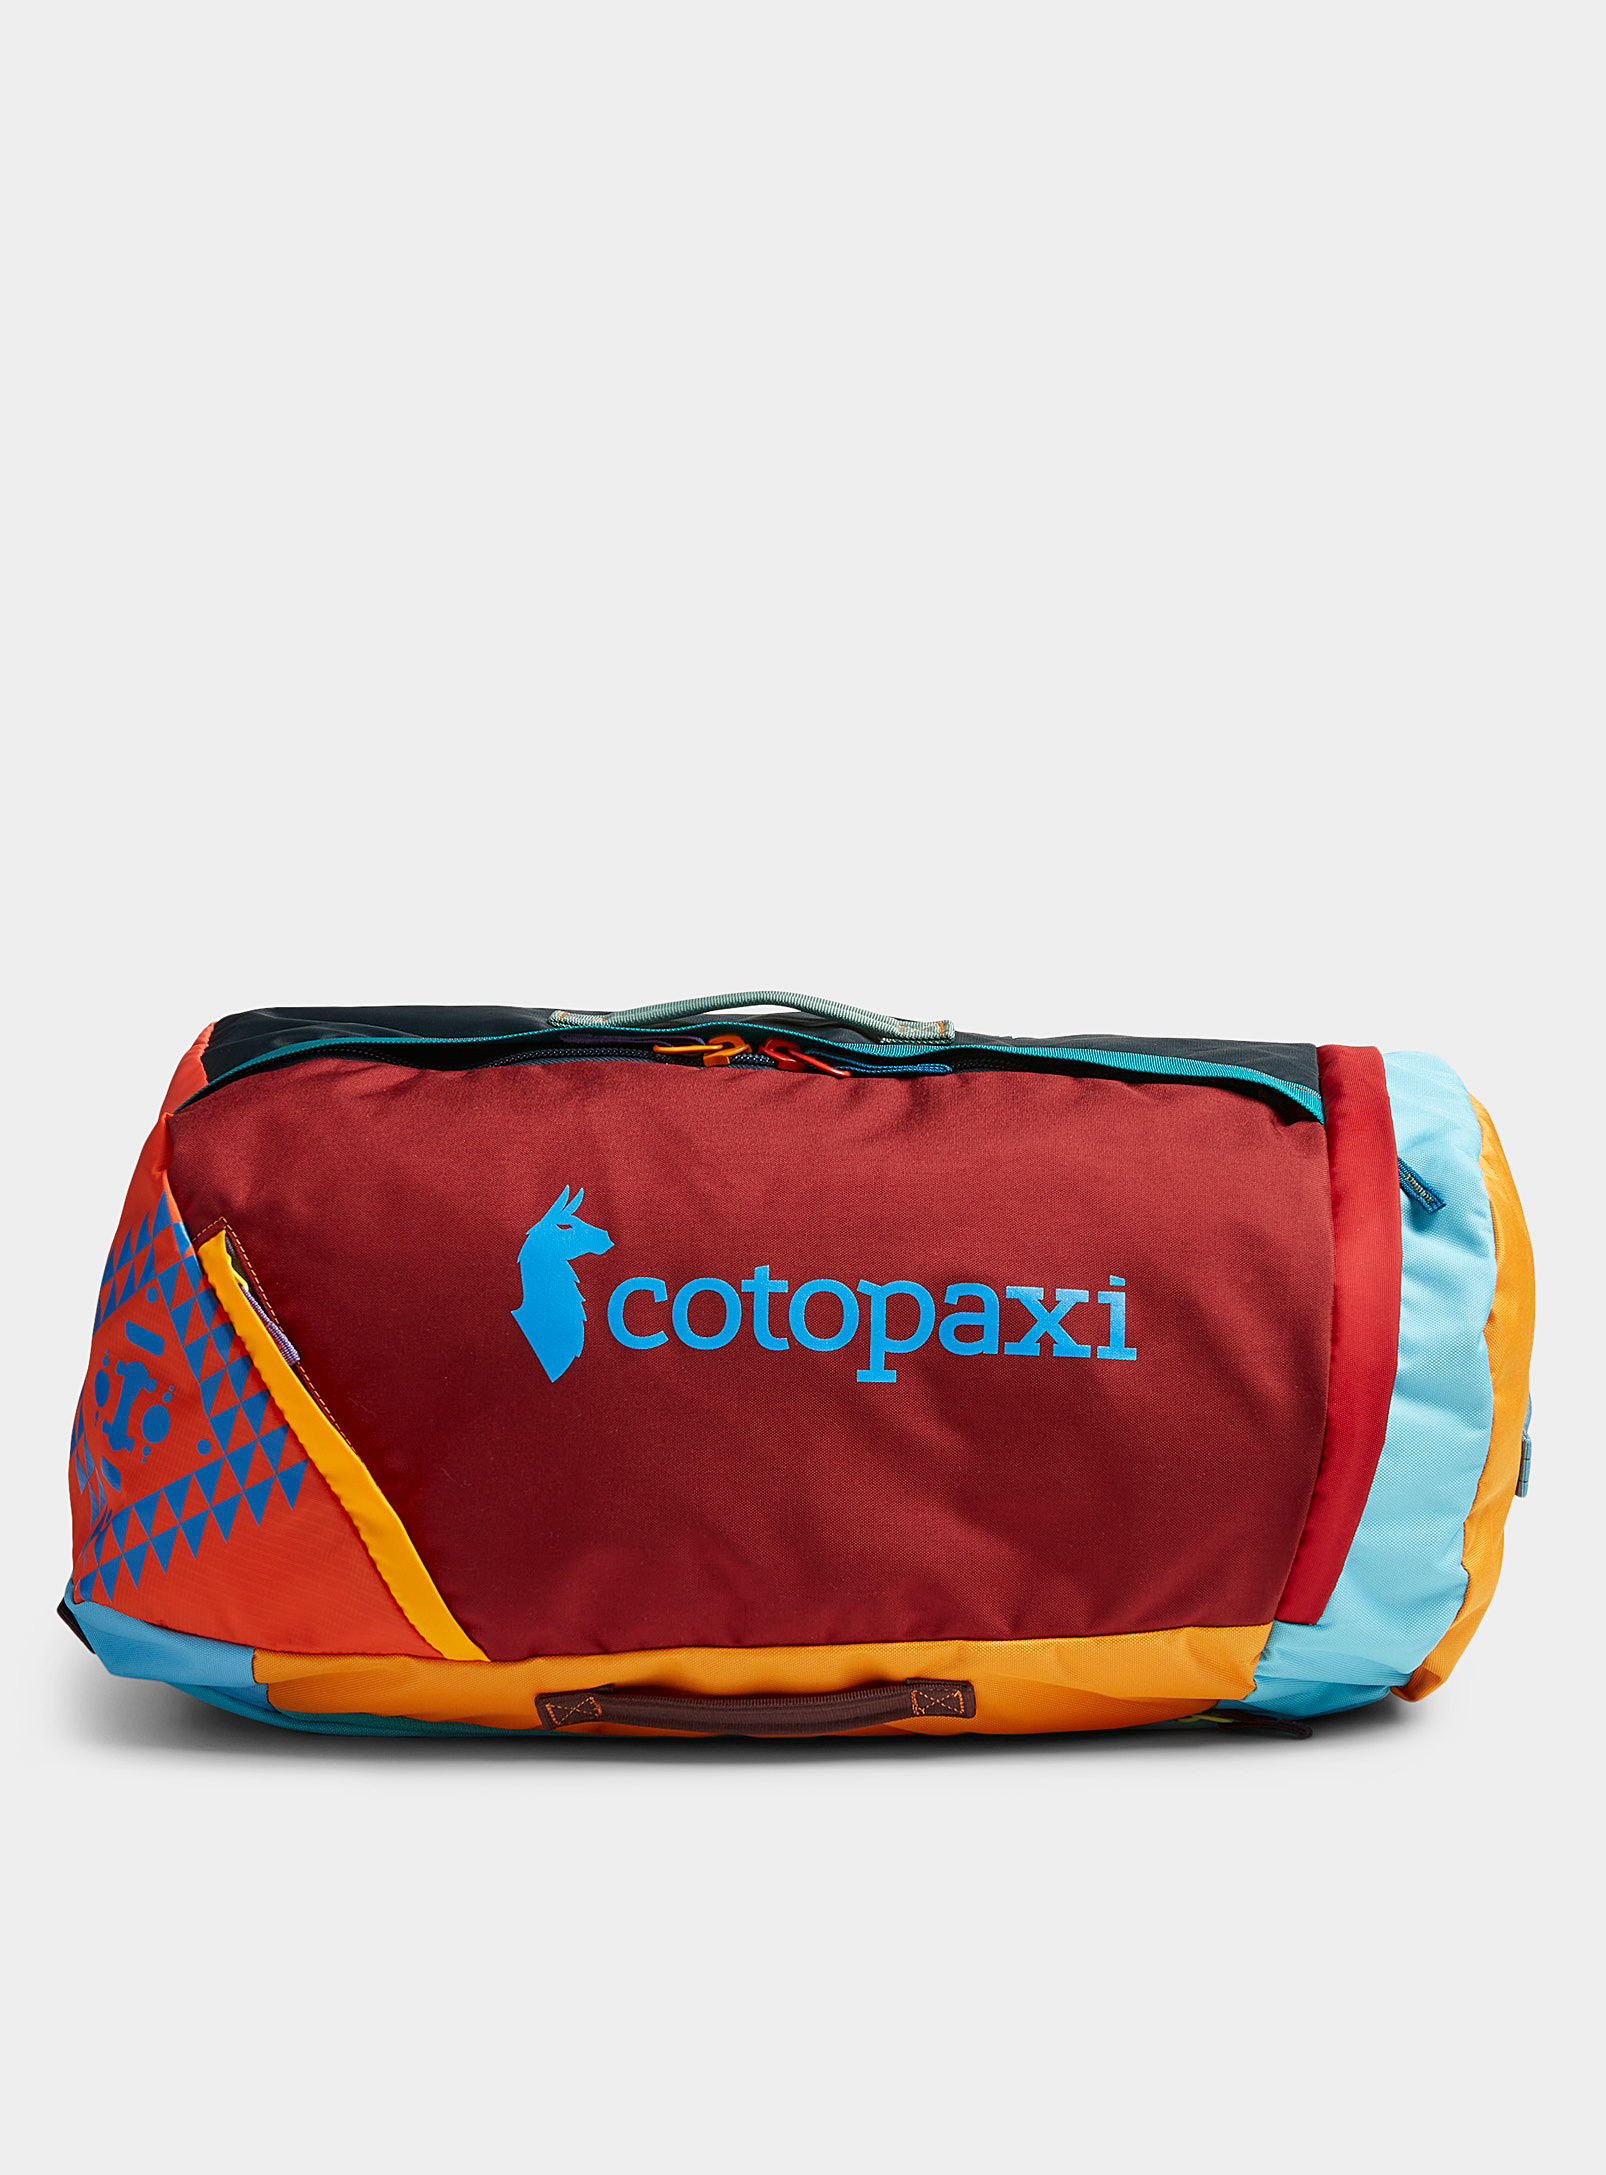 Cotopaxi Uyuni 36 L Large Sling Bag In Assorted